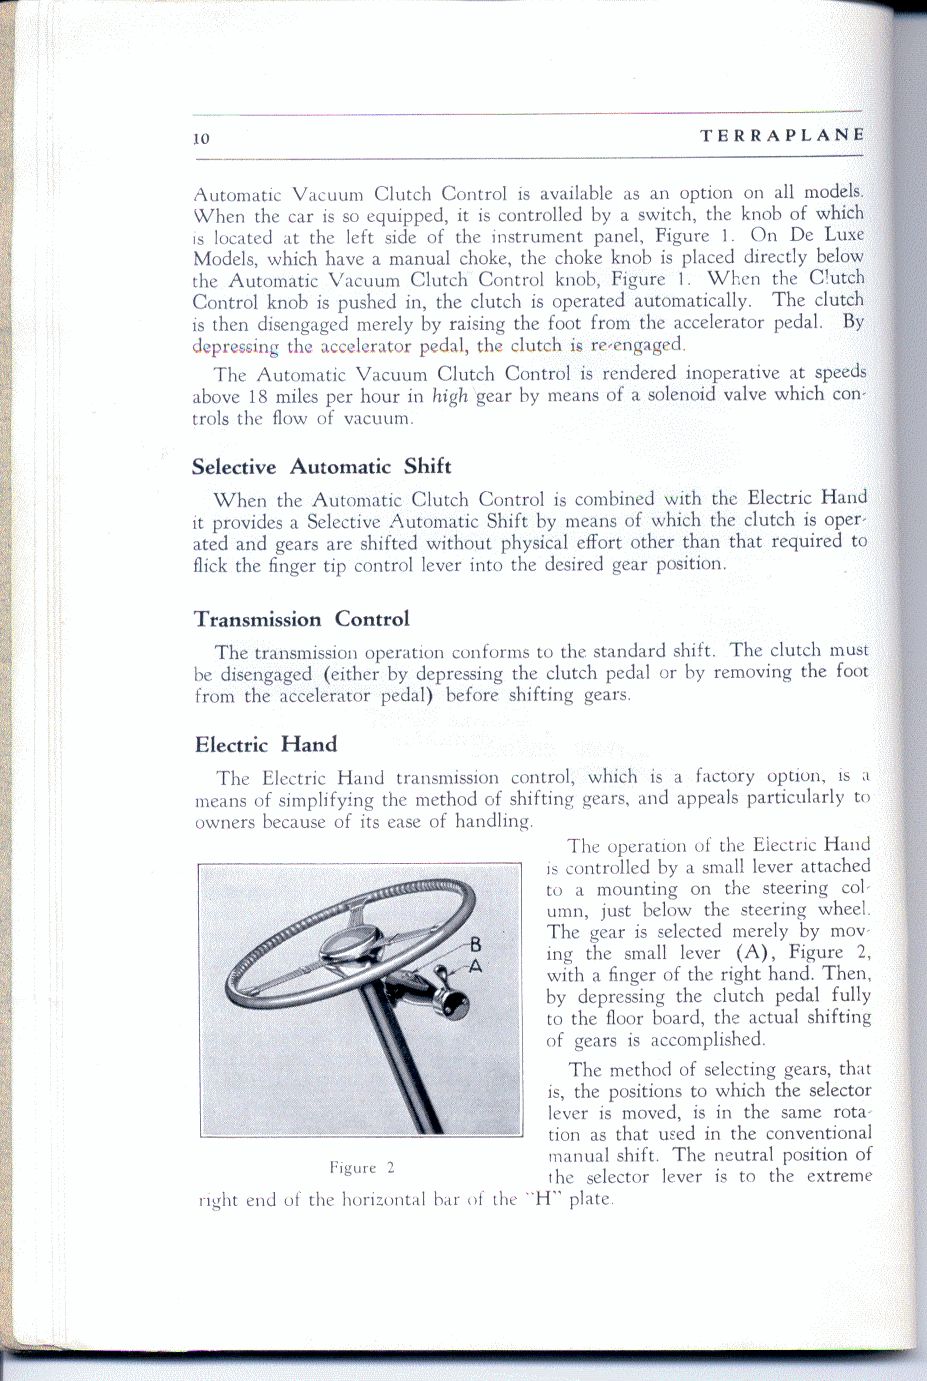 1937 Hudson Terraplane Owners Manual Page 10